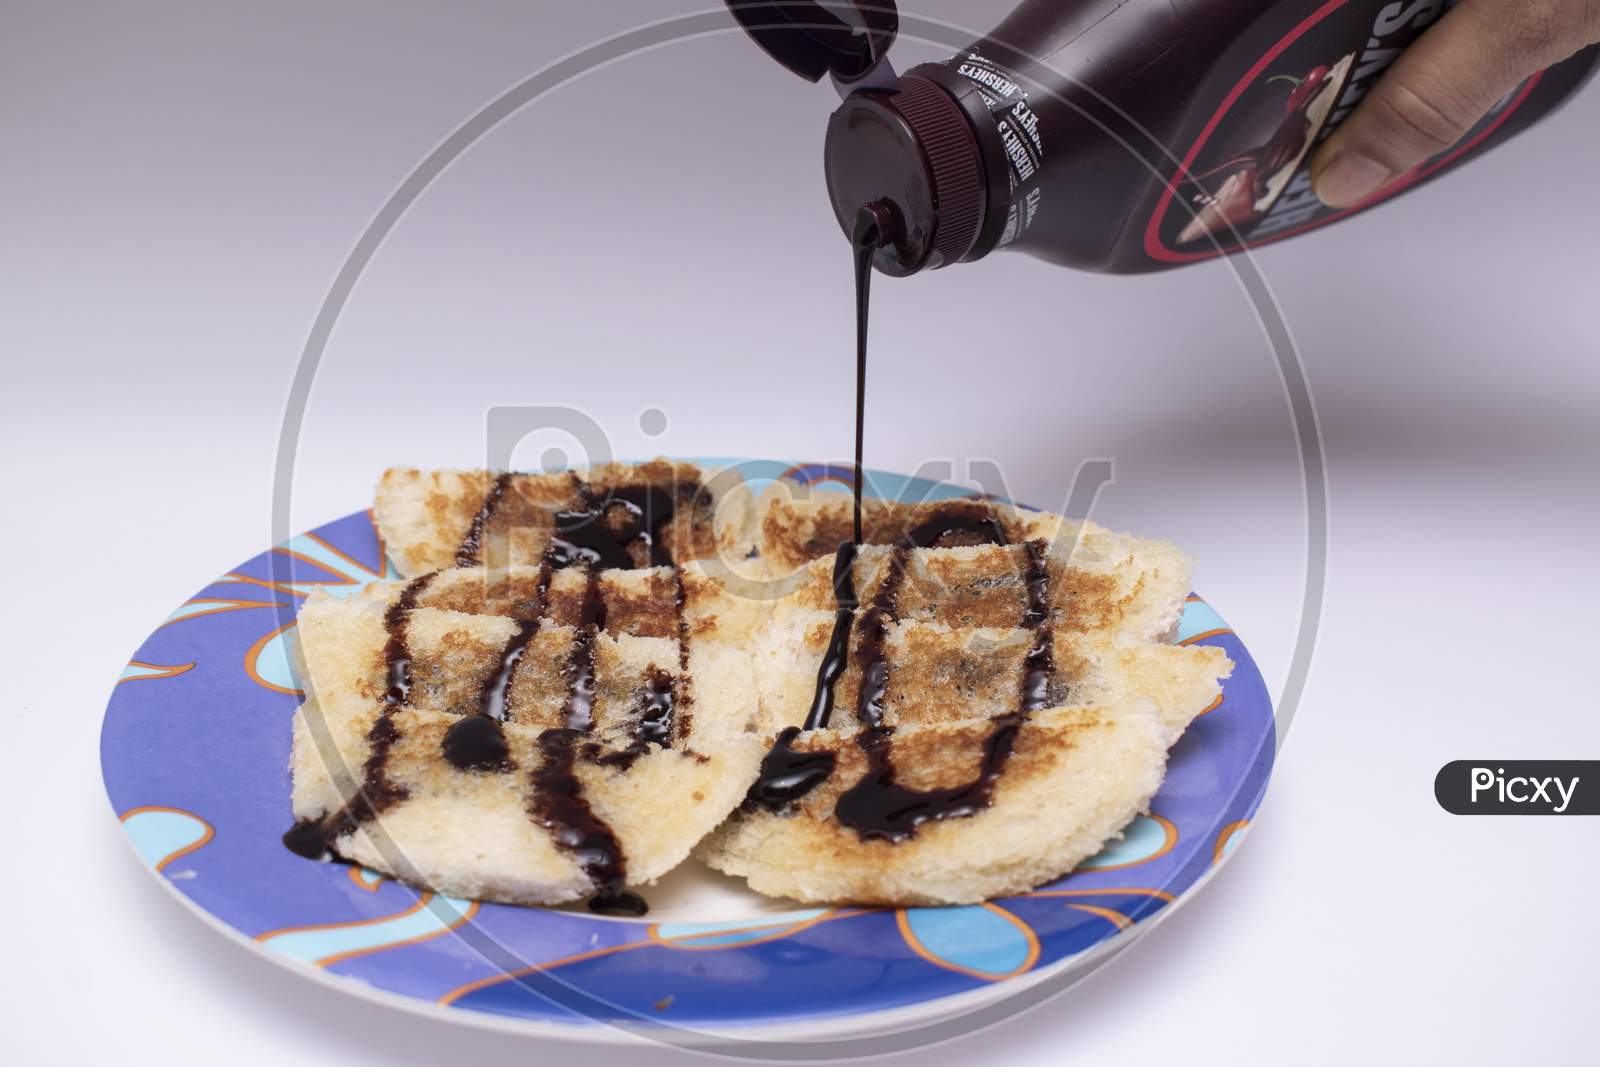 Decorating Hot Choco Lava Bread By Pouring And Garnishing With Chocolate Syrup Or Sauce